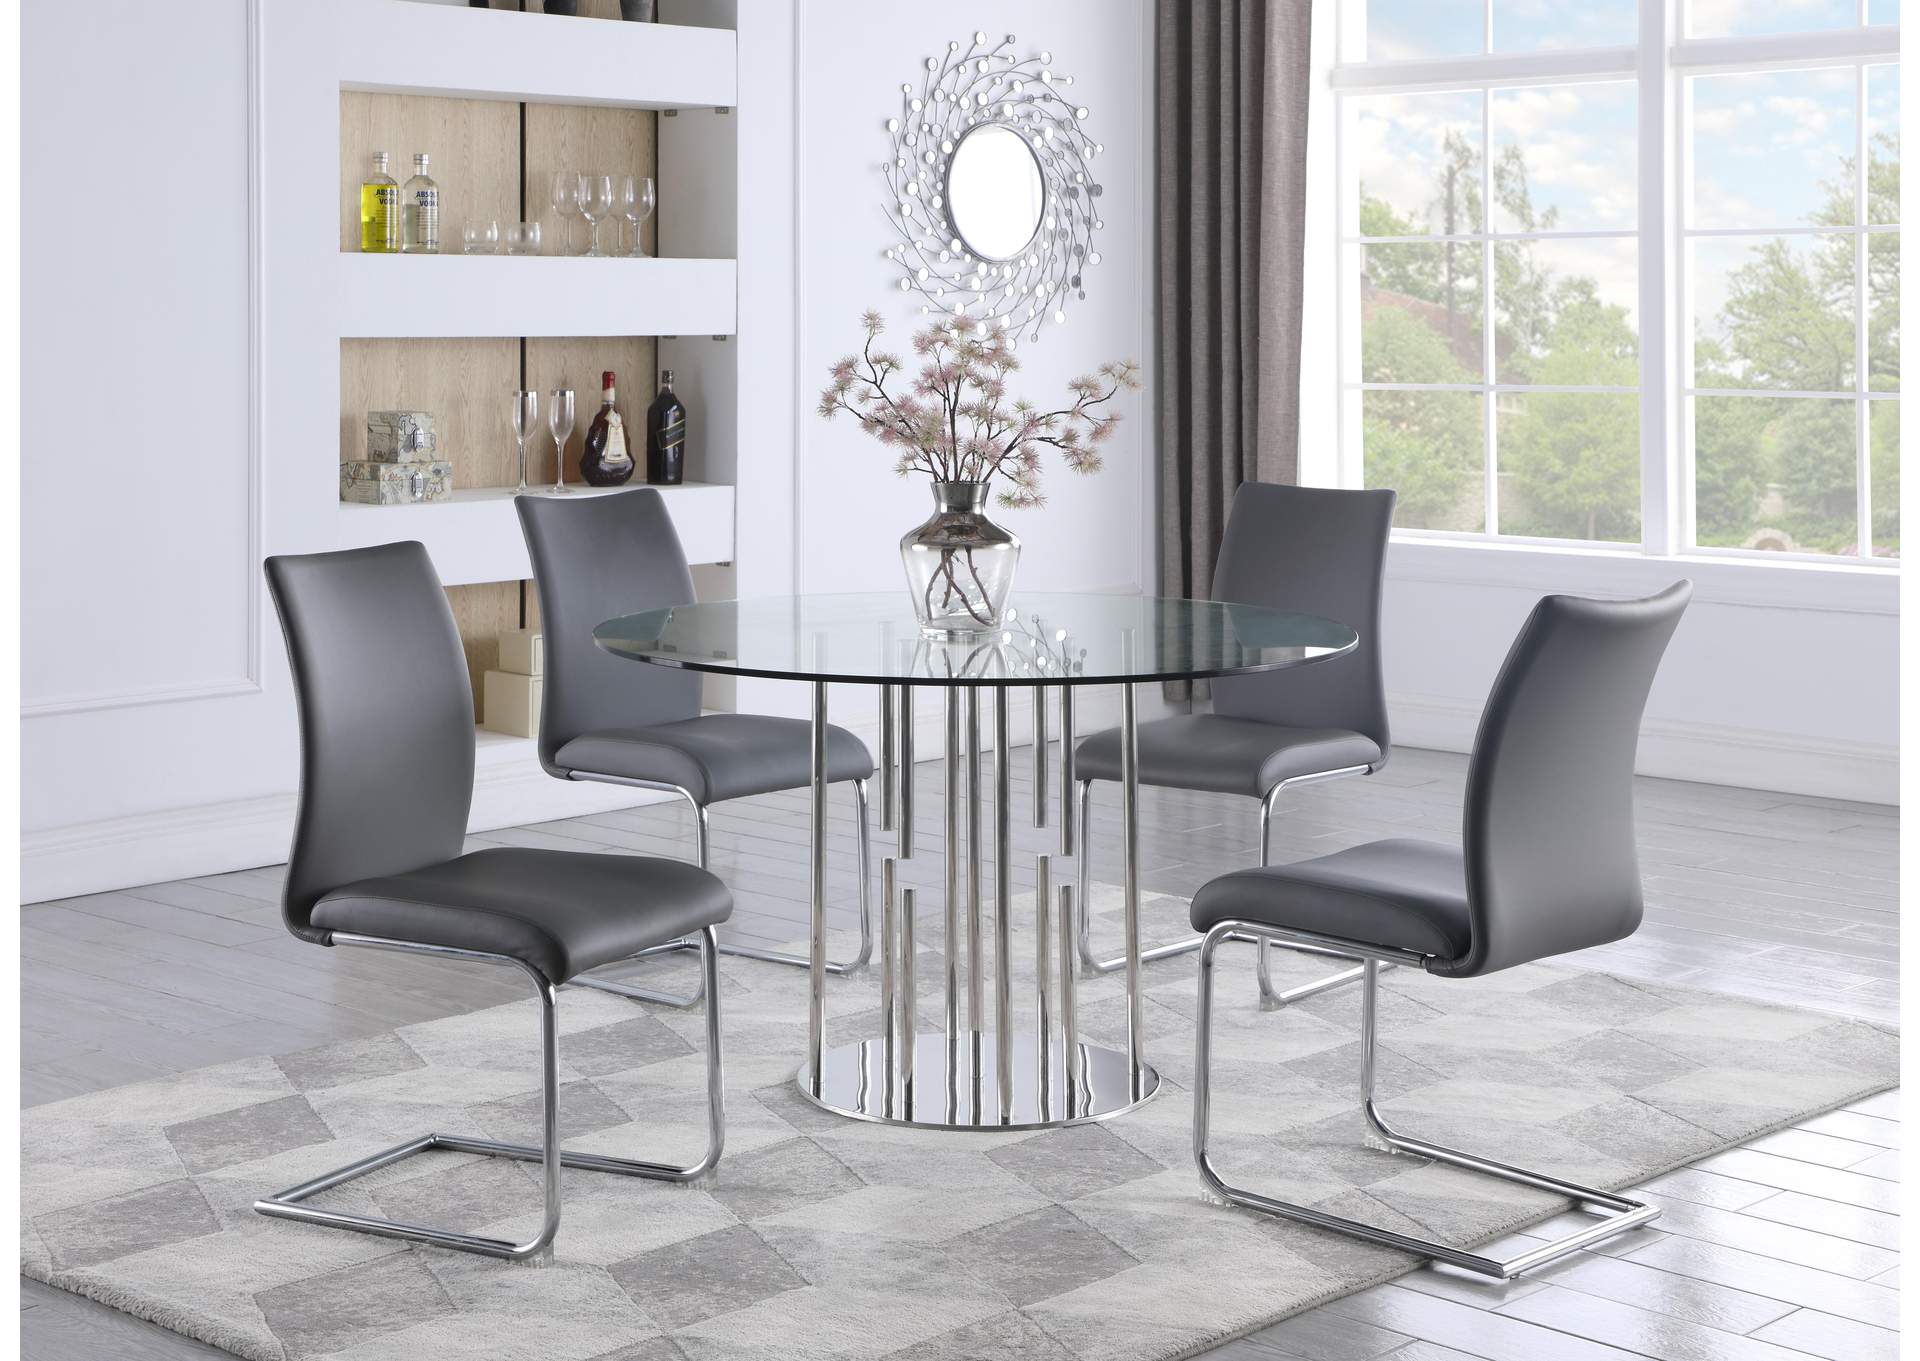 Dining Set With Contemporary Round Glass Table & Modern Contour-Back Chairs,Chintaly Imports